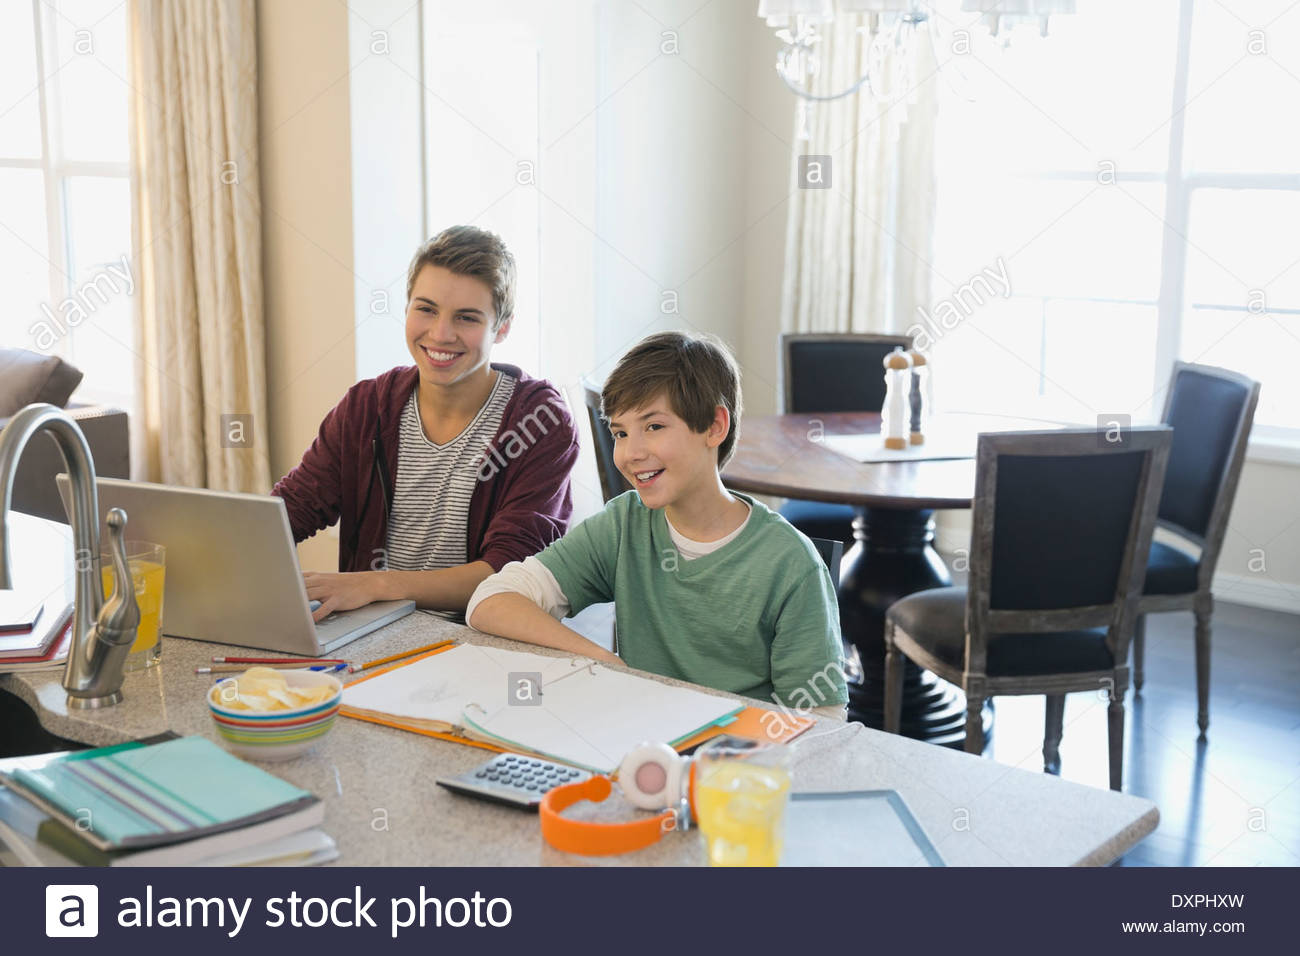 Smiling brothers studying at home Stock Photo